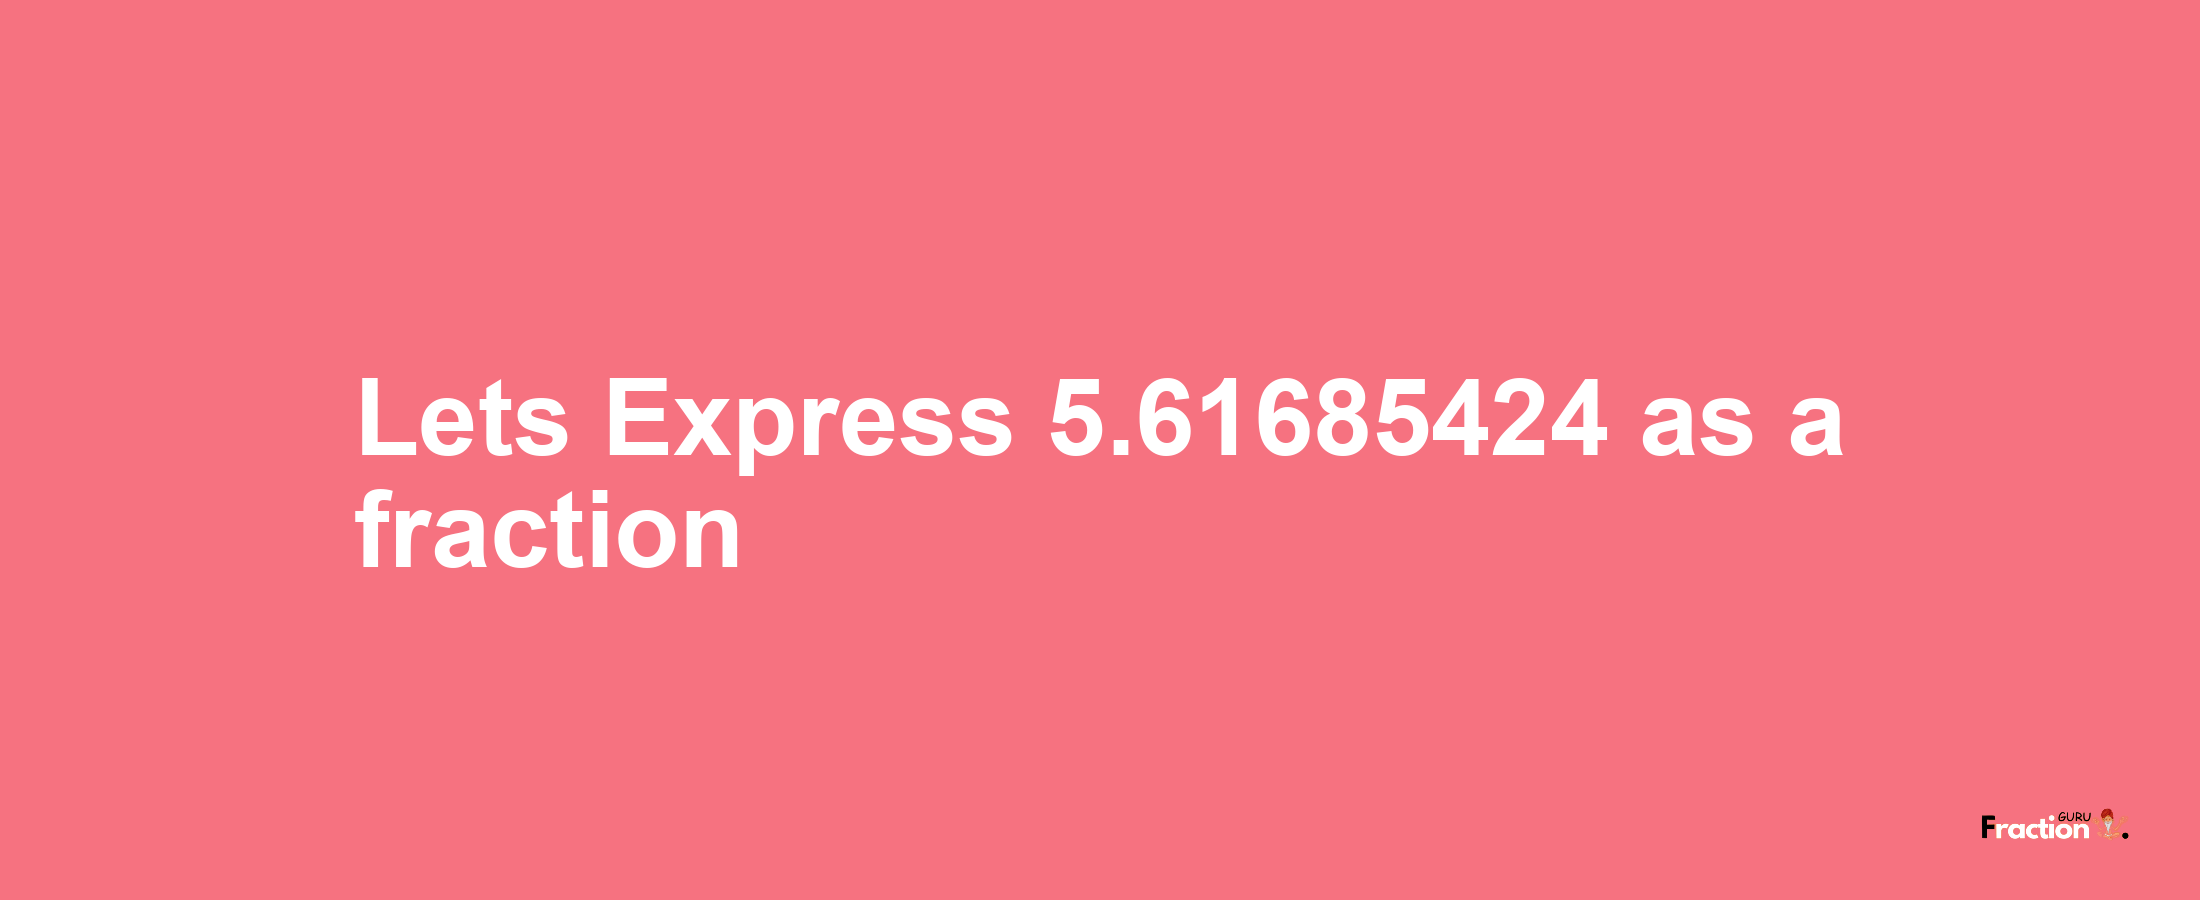 Lets Express 5.61685424 as afraction